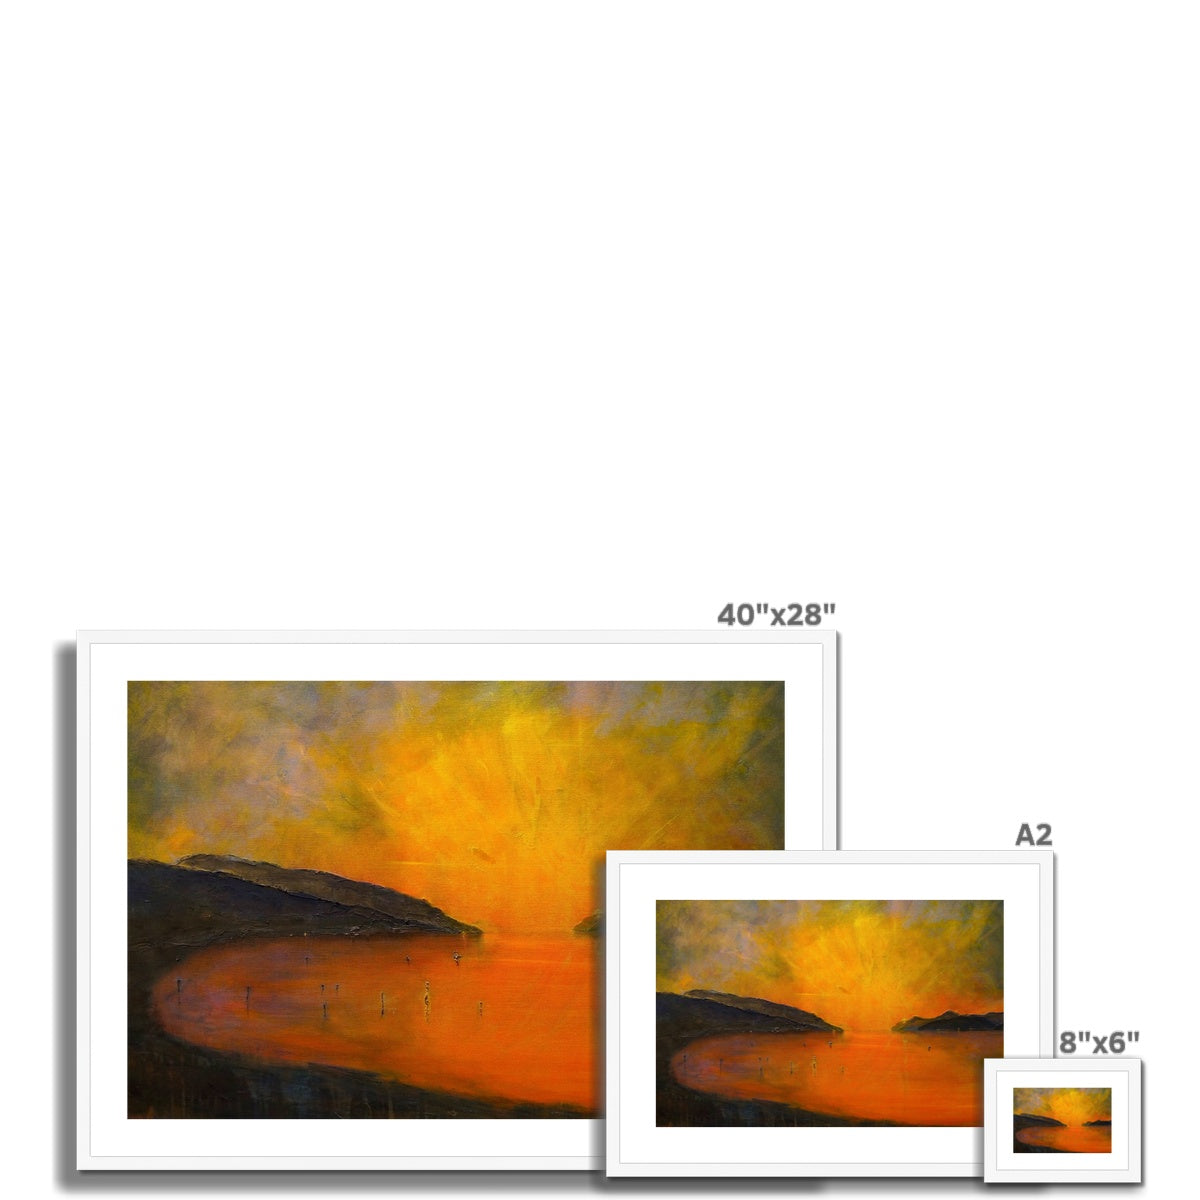 Loch Ness Sunset Painting | Framed & Mounted Prints From Scotland-Framed & Mounted Prints-Scottish Lochs & Mountains Art Gallery-Paintings, Prints, Homeware, Art Gifts From Scotland By Scottish Artist Kevin Hunter